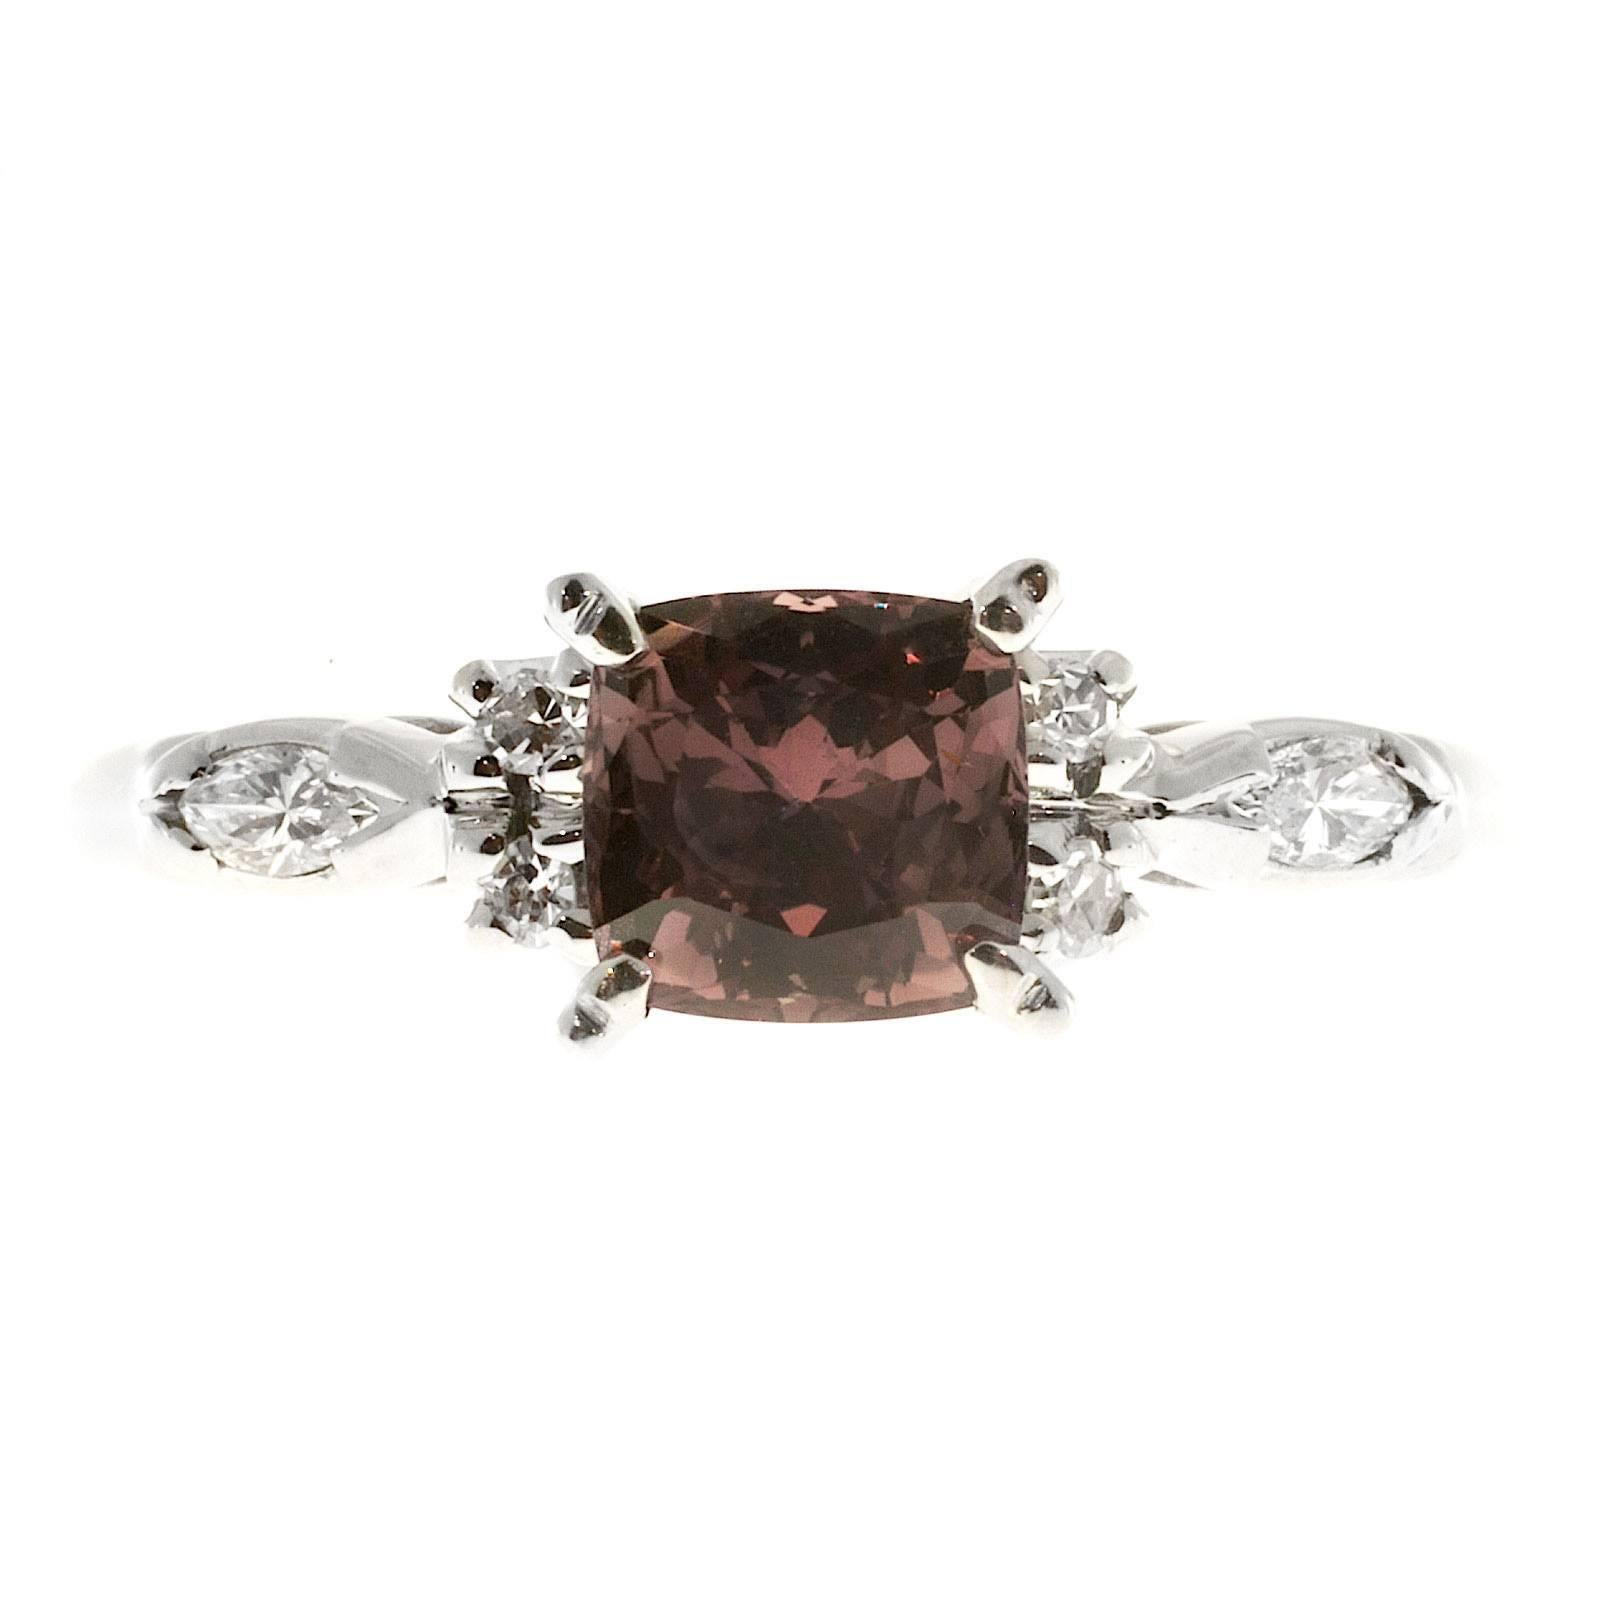 Raspberry Brown Pink 1.30ct natural Sapphire showing different shades of pink and reddish brown in different lights. 18k white gold setting with round and marquise side diamonds. 

1 Natural no heat and no enhancement cushion shape Sapphire, approx.